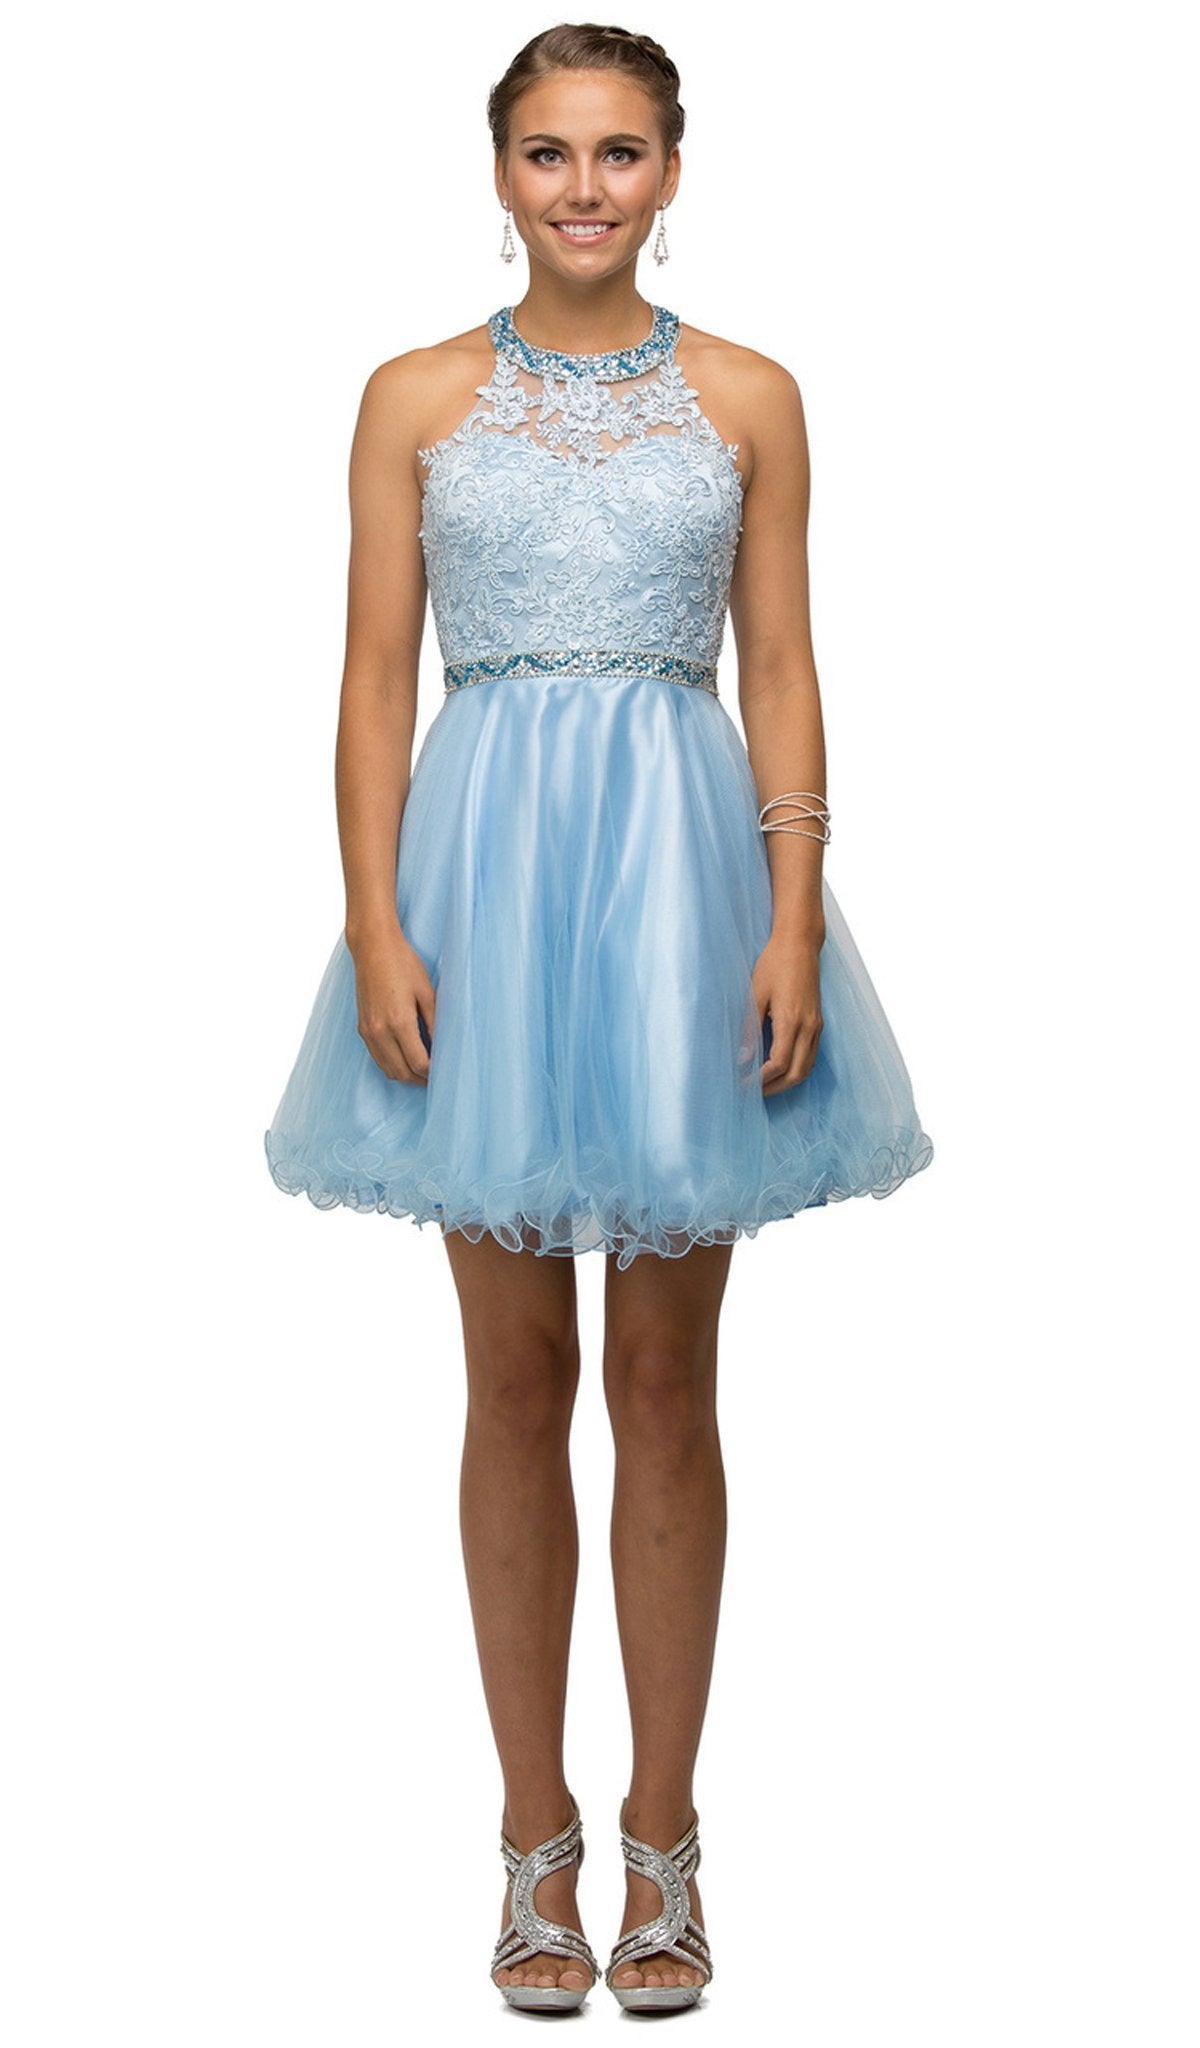 Image of Dancing Queen - 9534 Bejeweled Collar Halter Lace A-Line Homecoming Dress